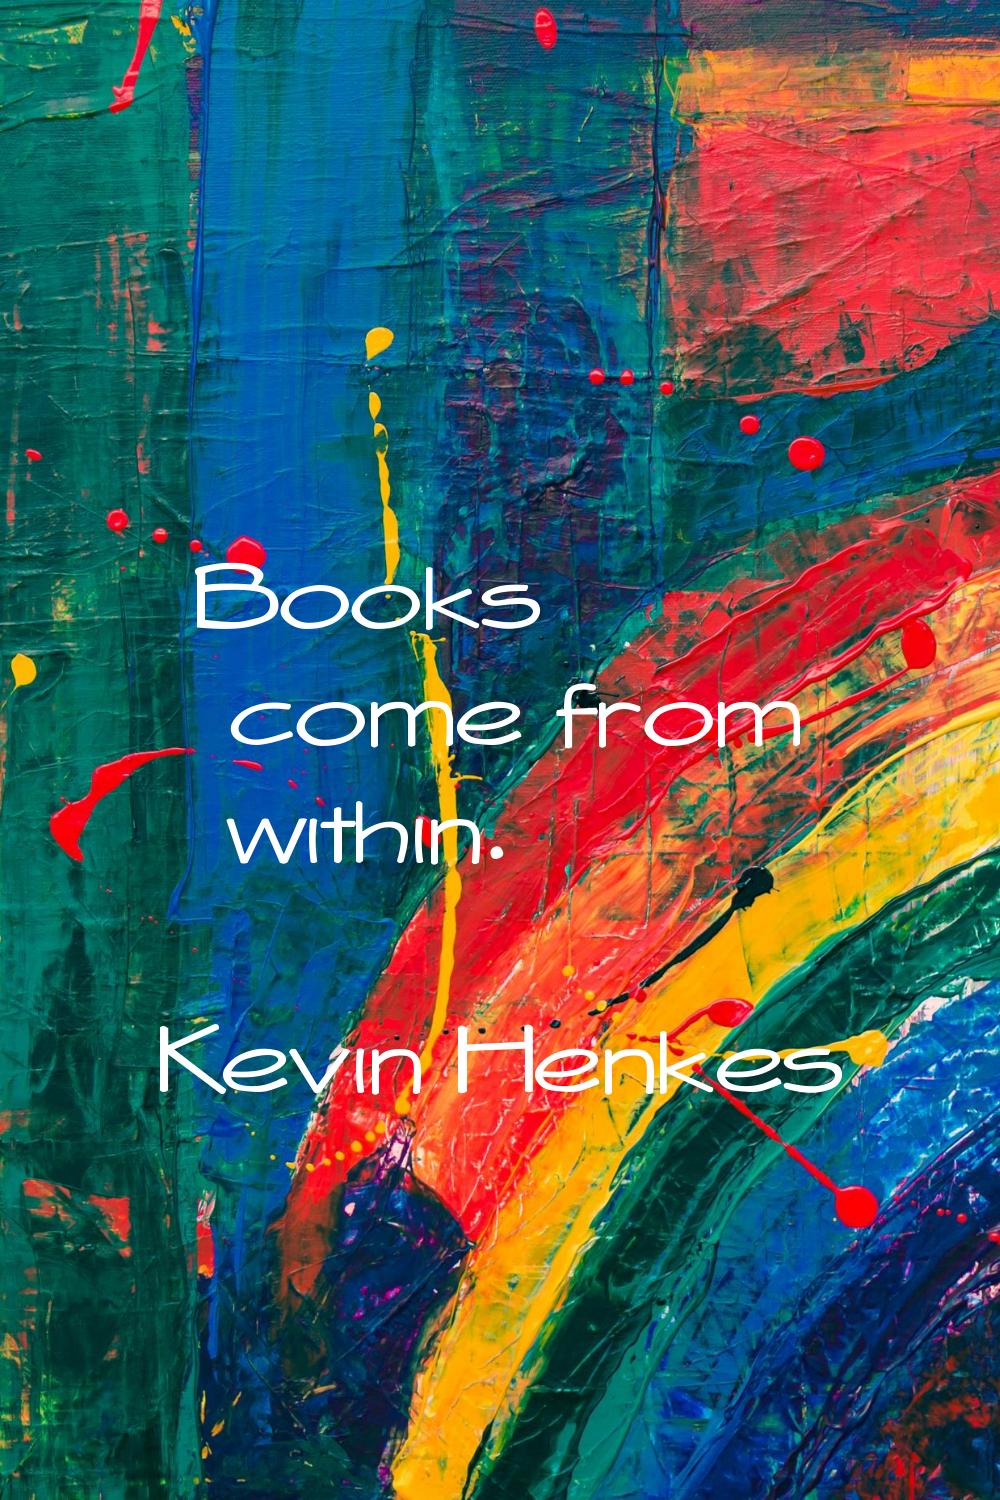 Books come from within.